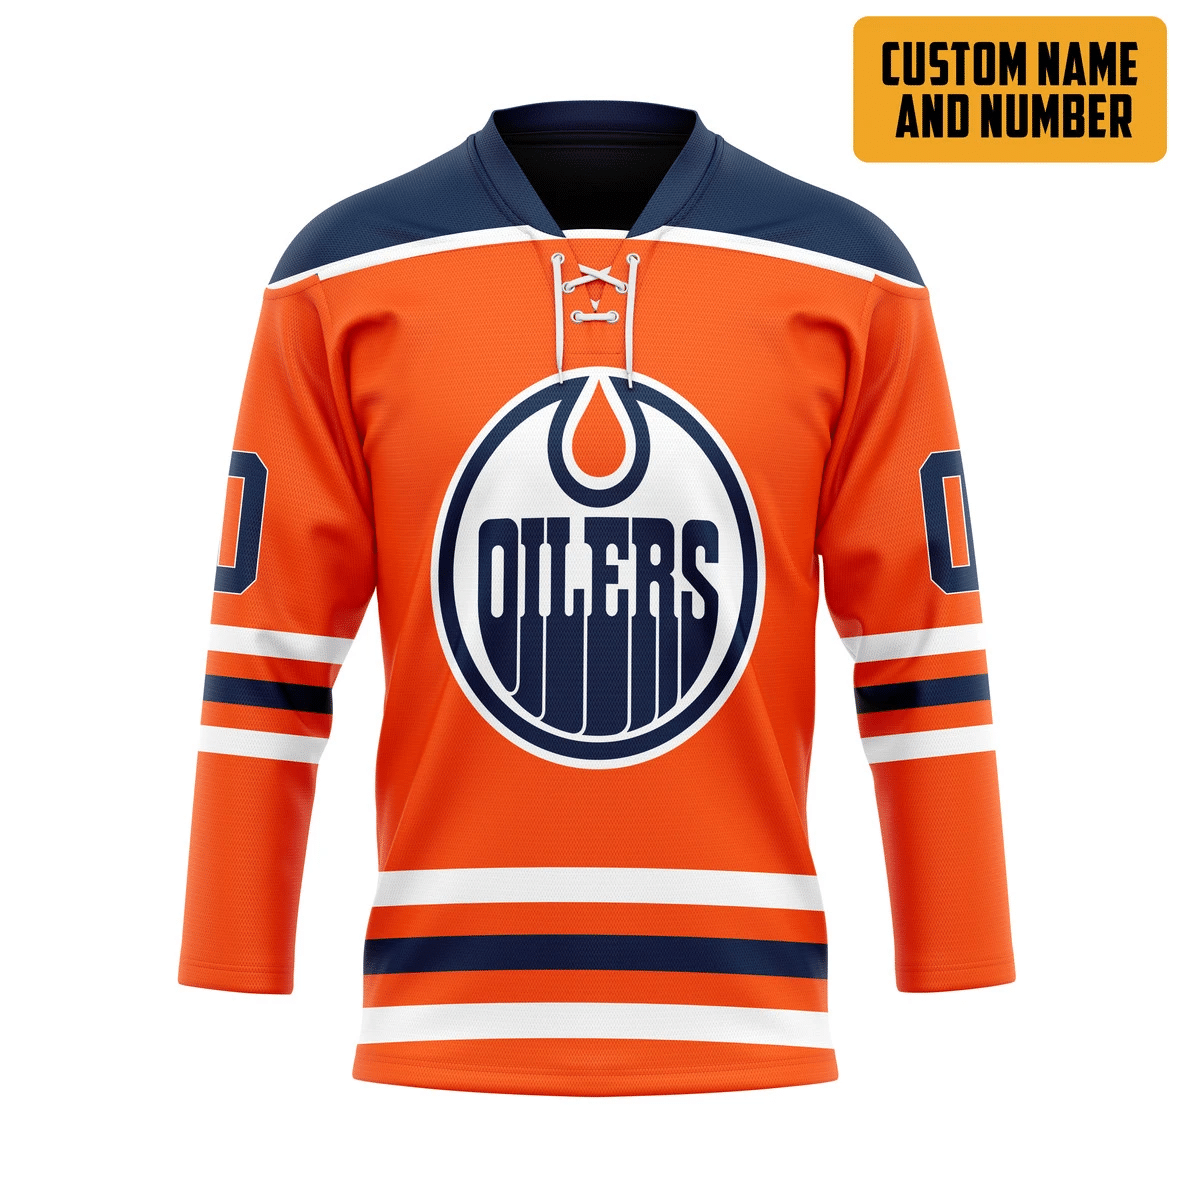 The hockey jersey is one of the most important items to have as a sports fan. 133